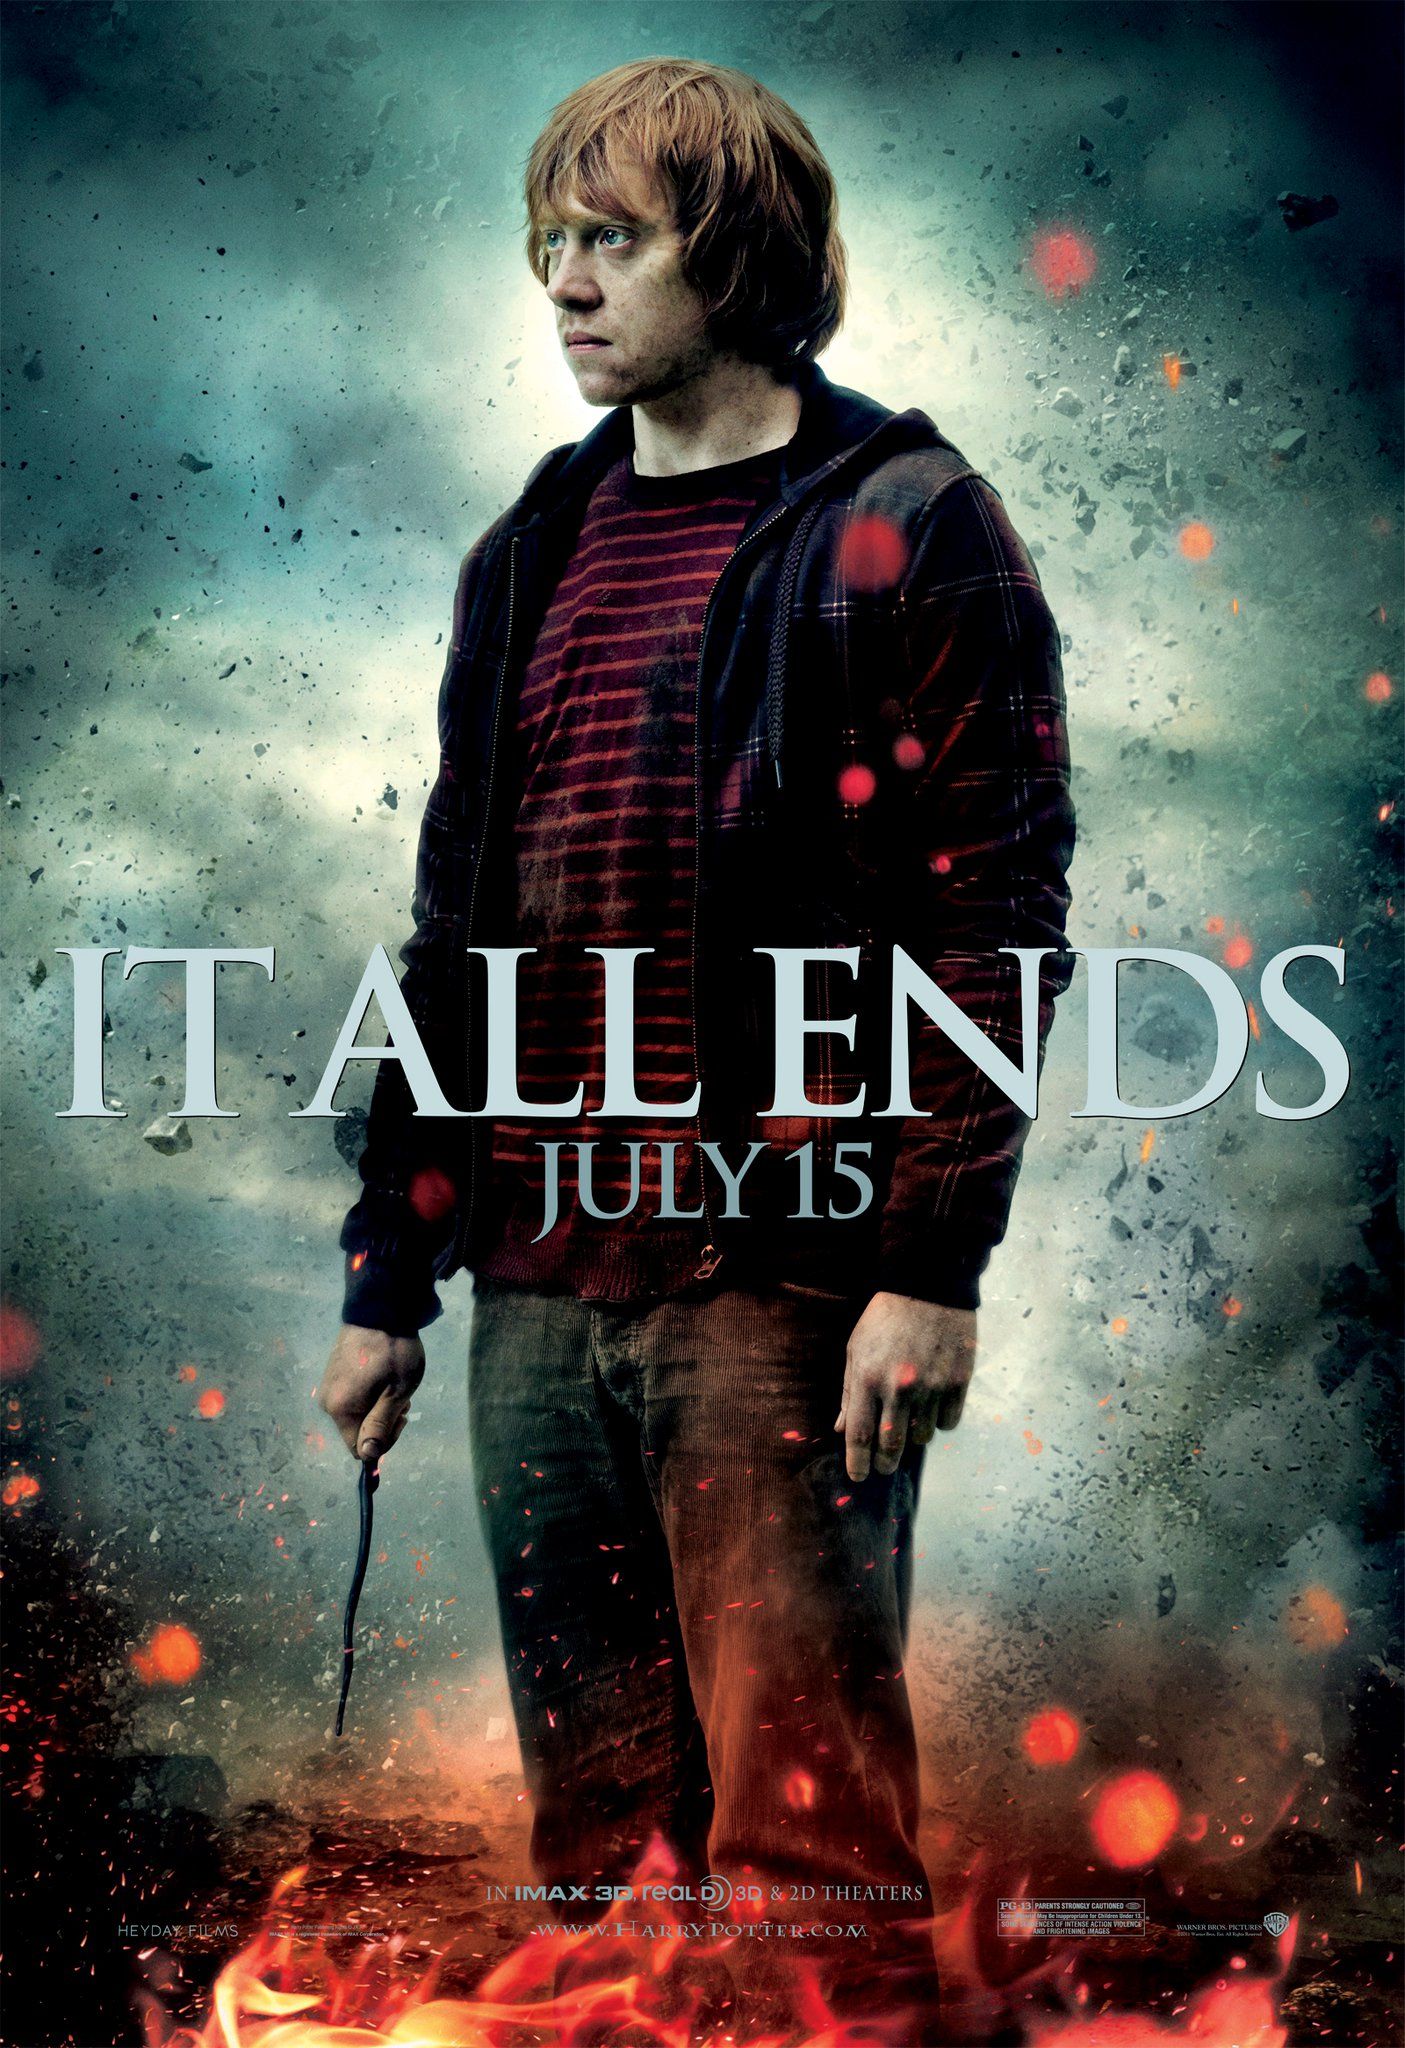 HARRY POTTER AND THE DEATHLY HALLOWS – PART 2 Posters | Collider